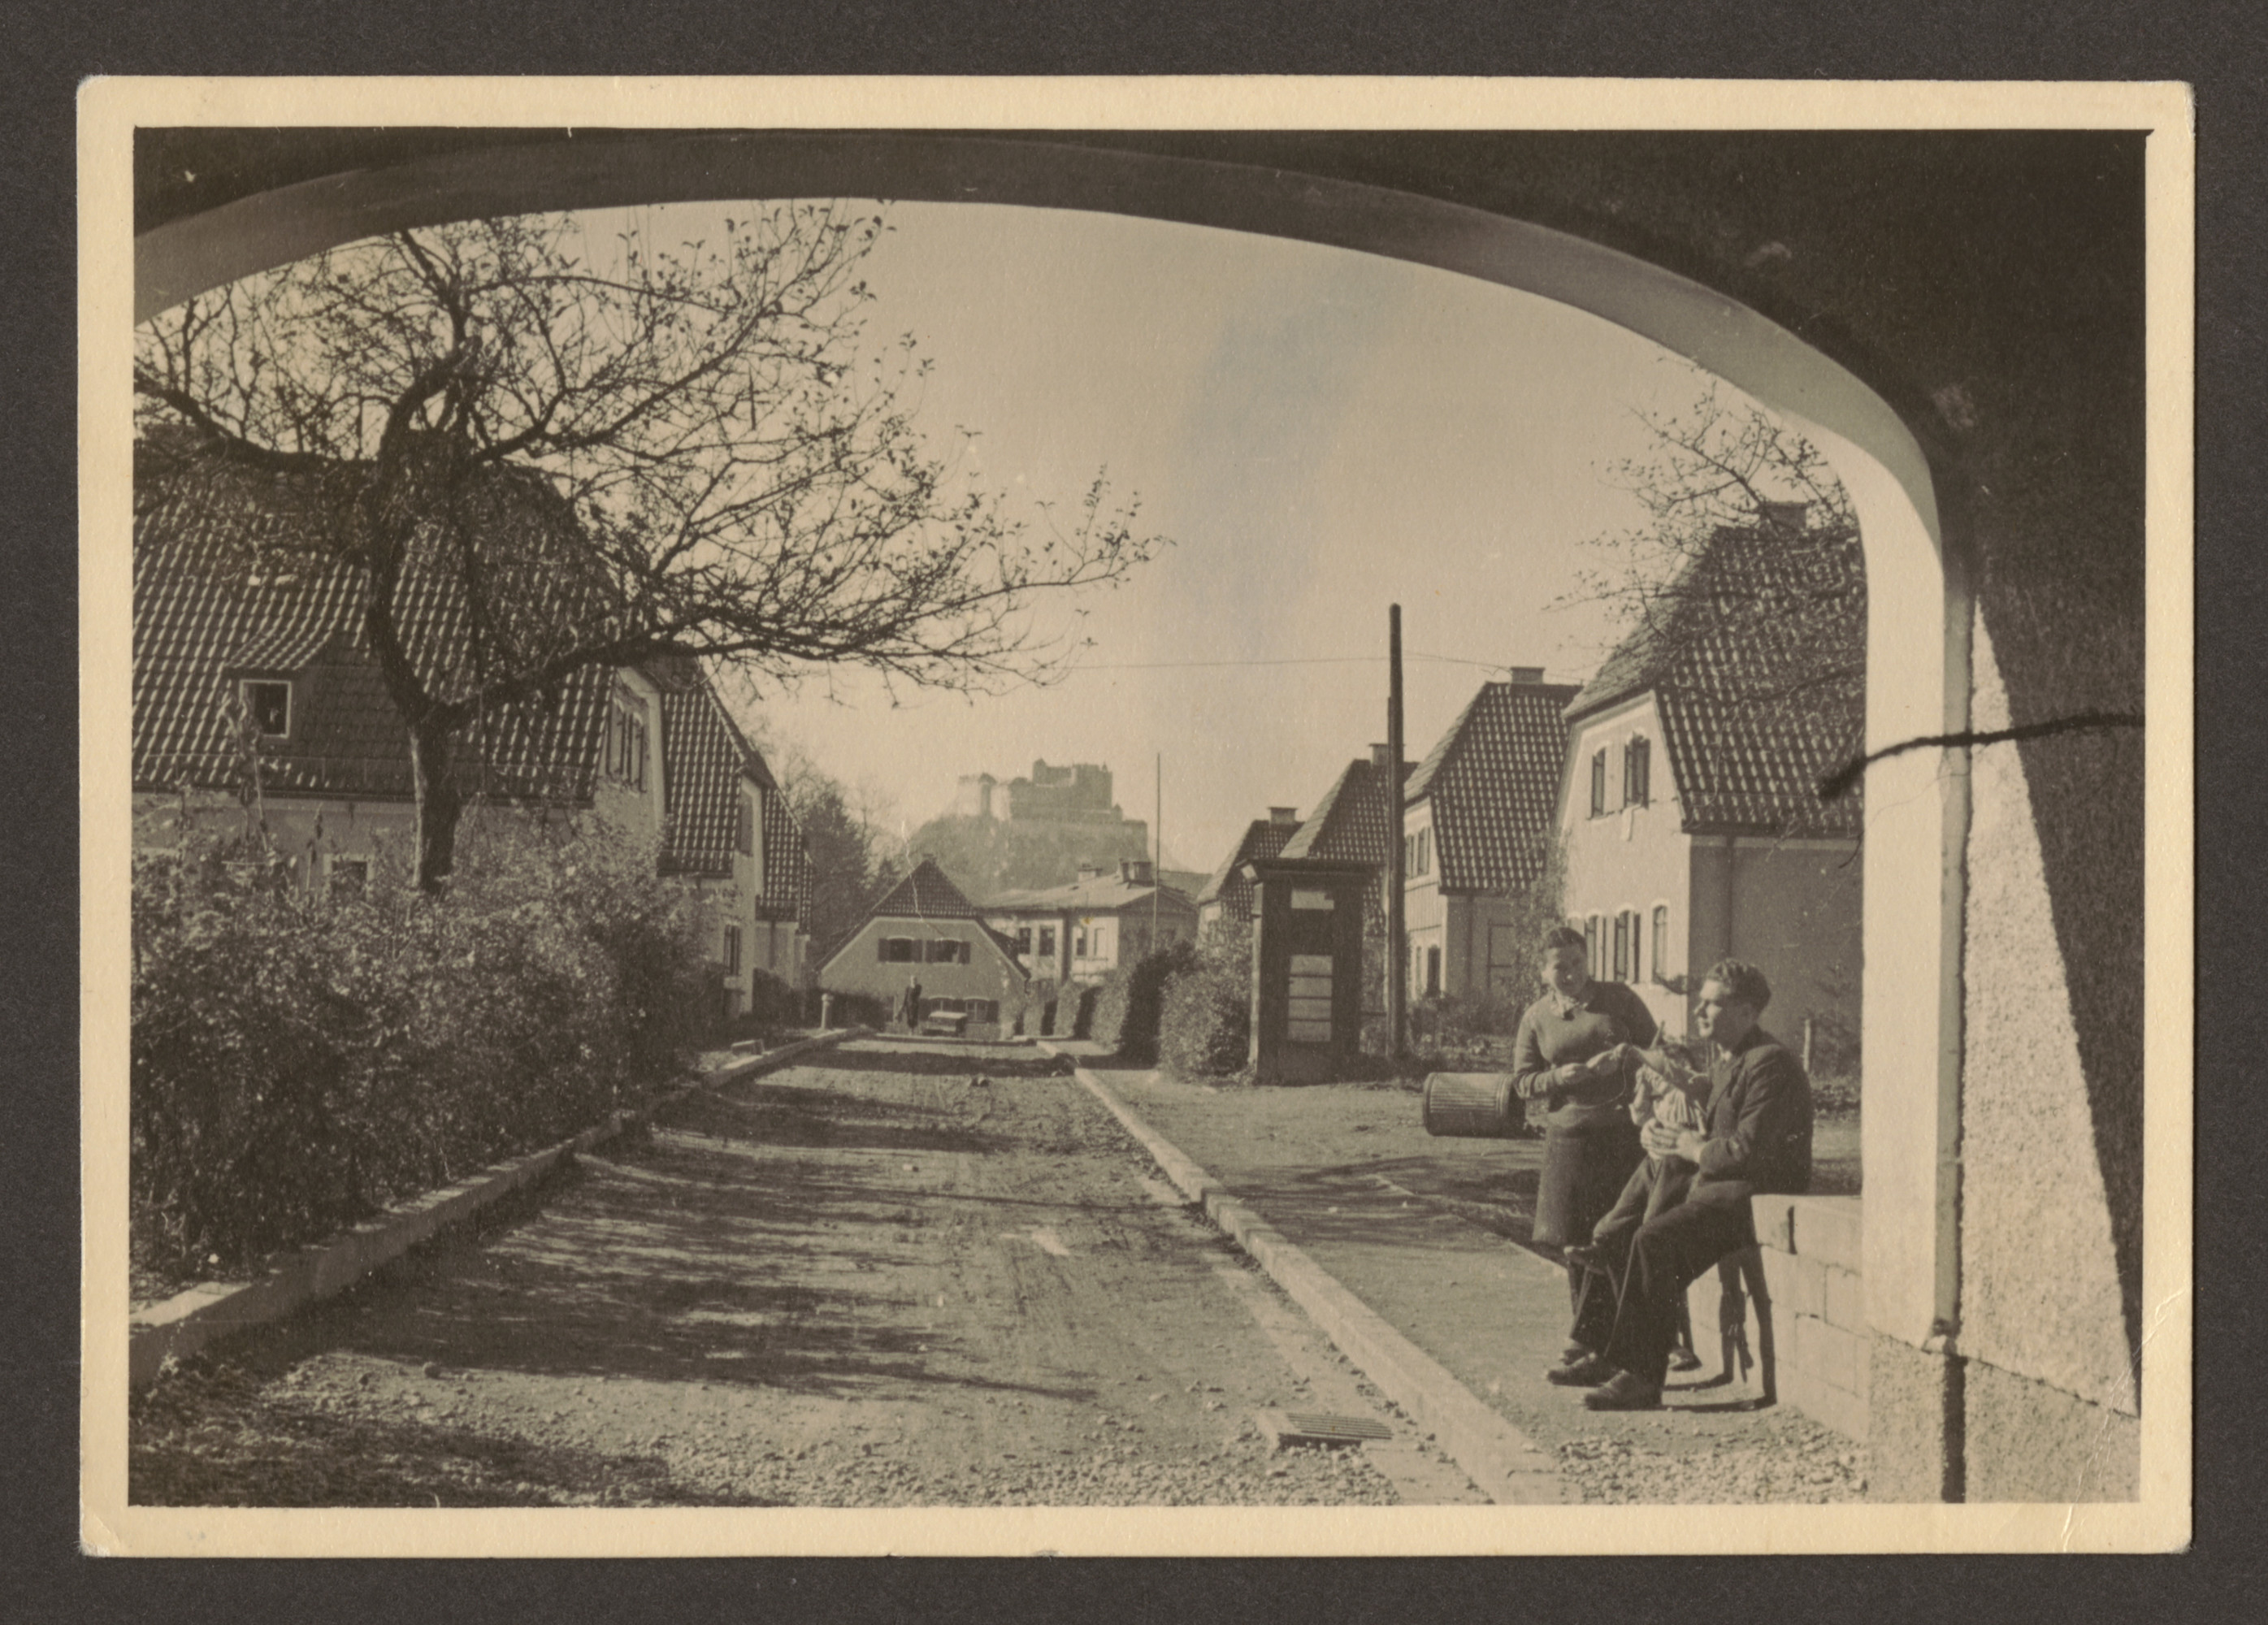 Manya Blacher and an unidentified man pose under an archway in Salzburg [perhaps on their way to Germany].